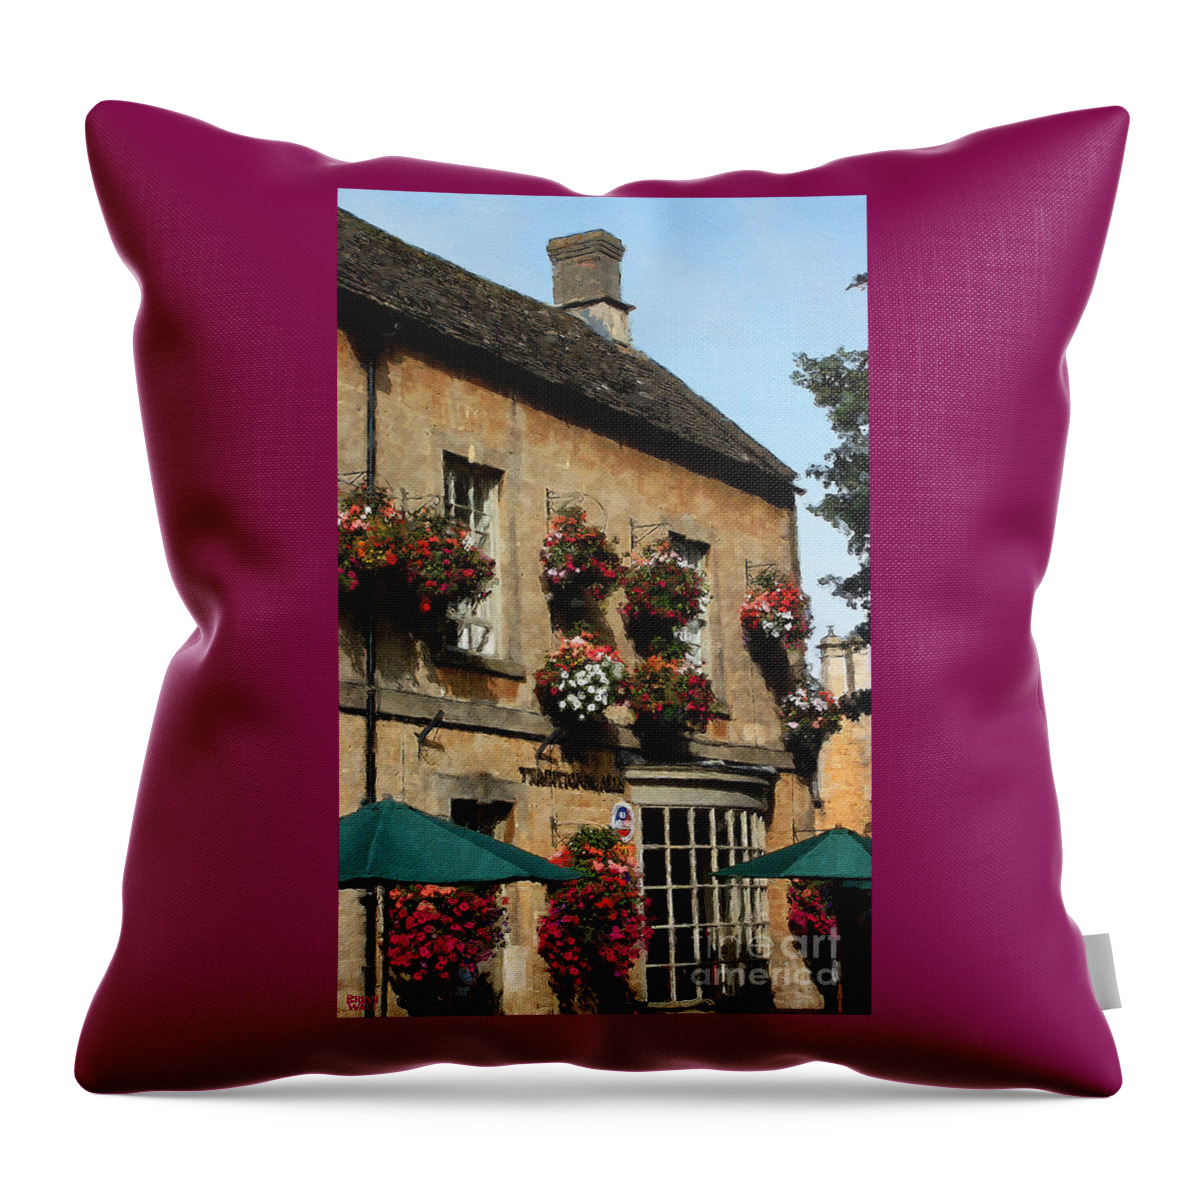 Bourton-on-the-water Throw Pillow featuring the photograph Bourton Pub by Brian Watt